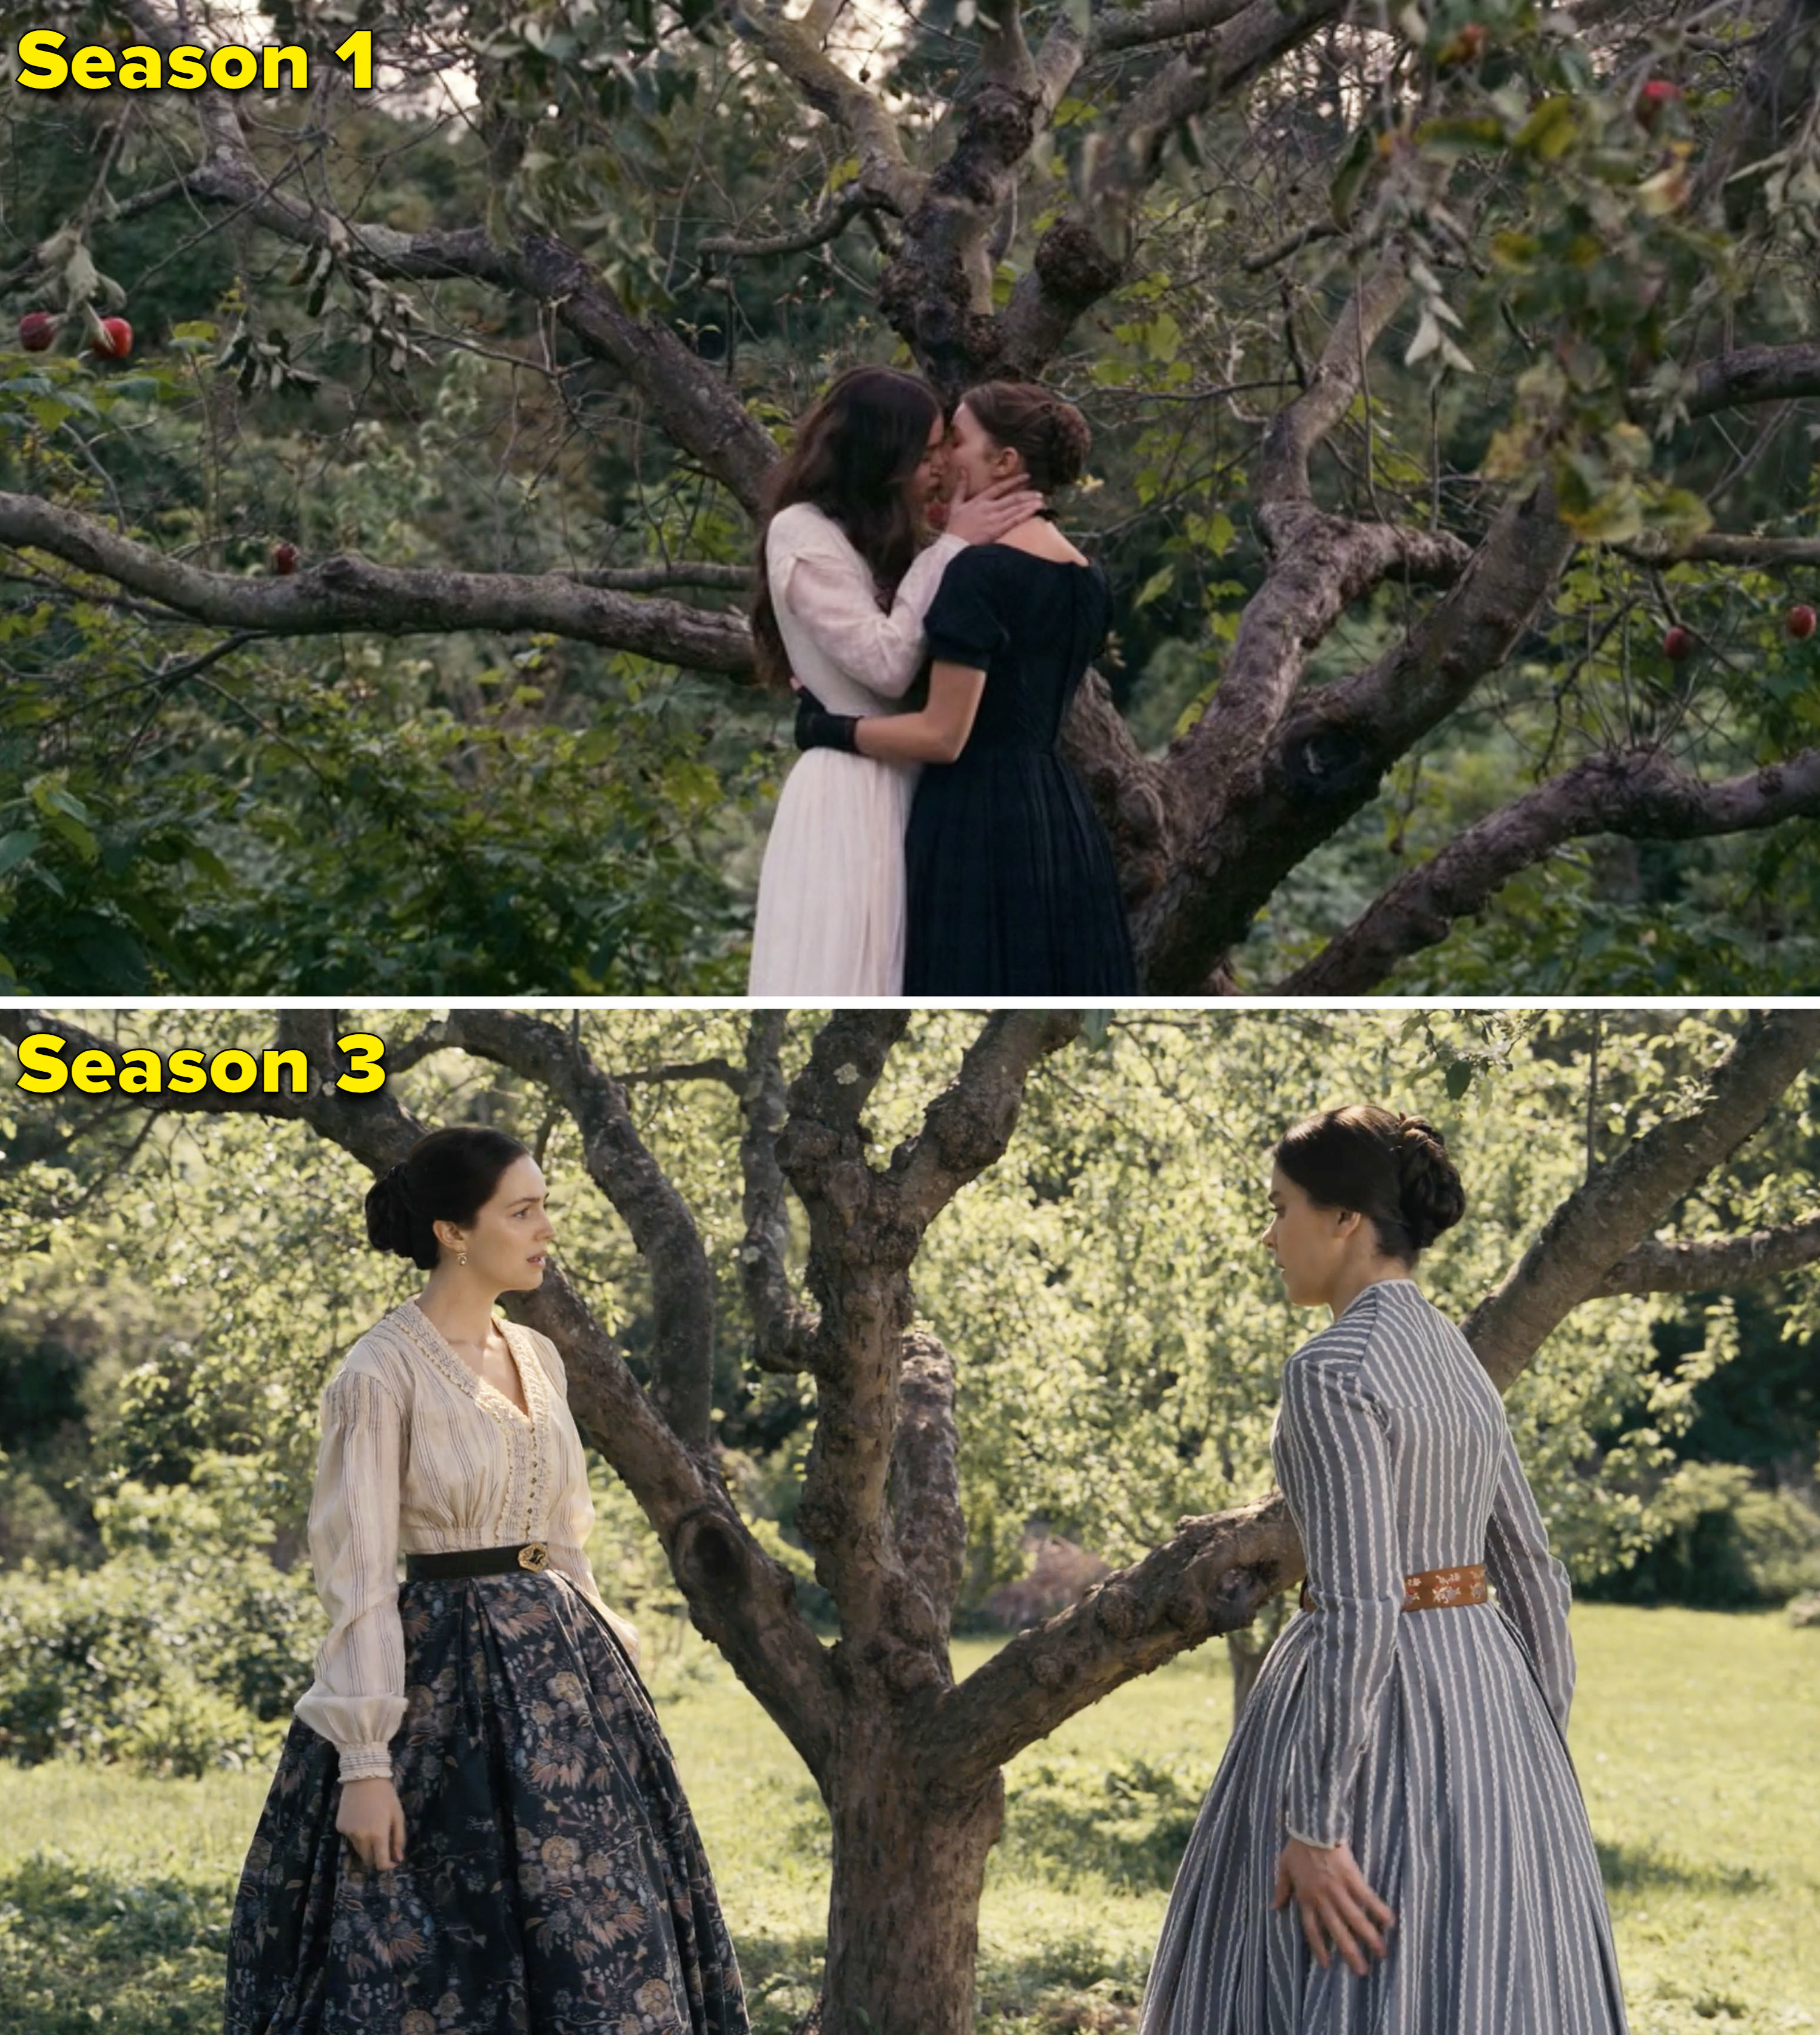 Emily and Sue in the orchard in Season 1 vs Season 3